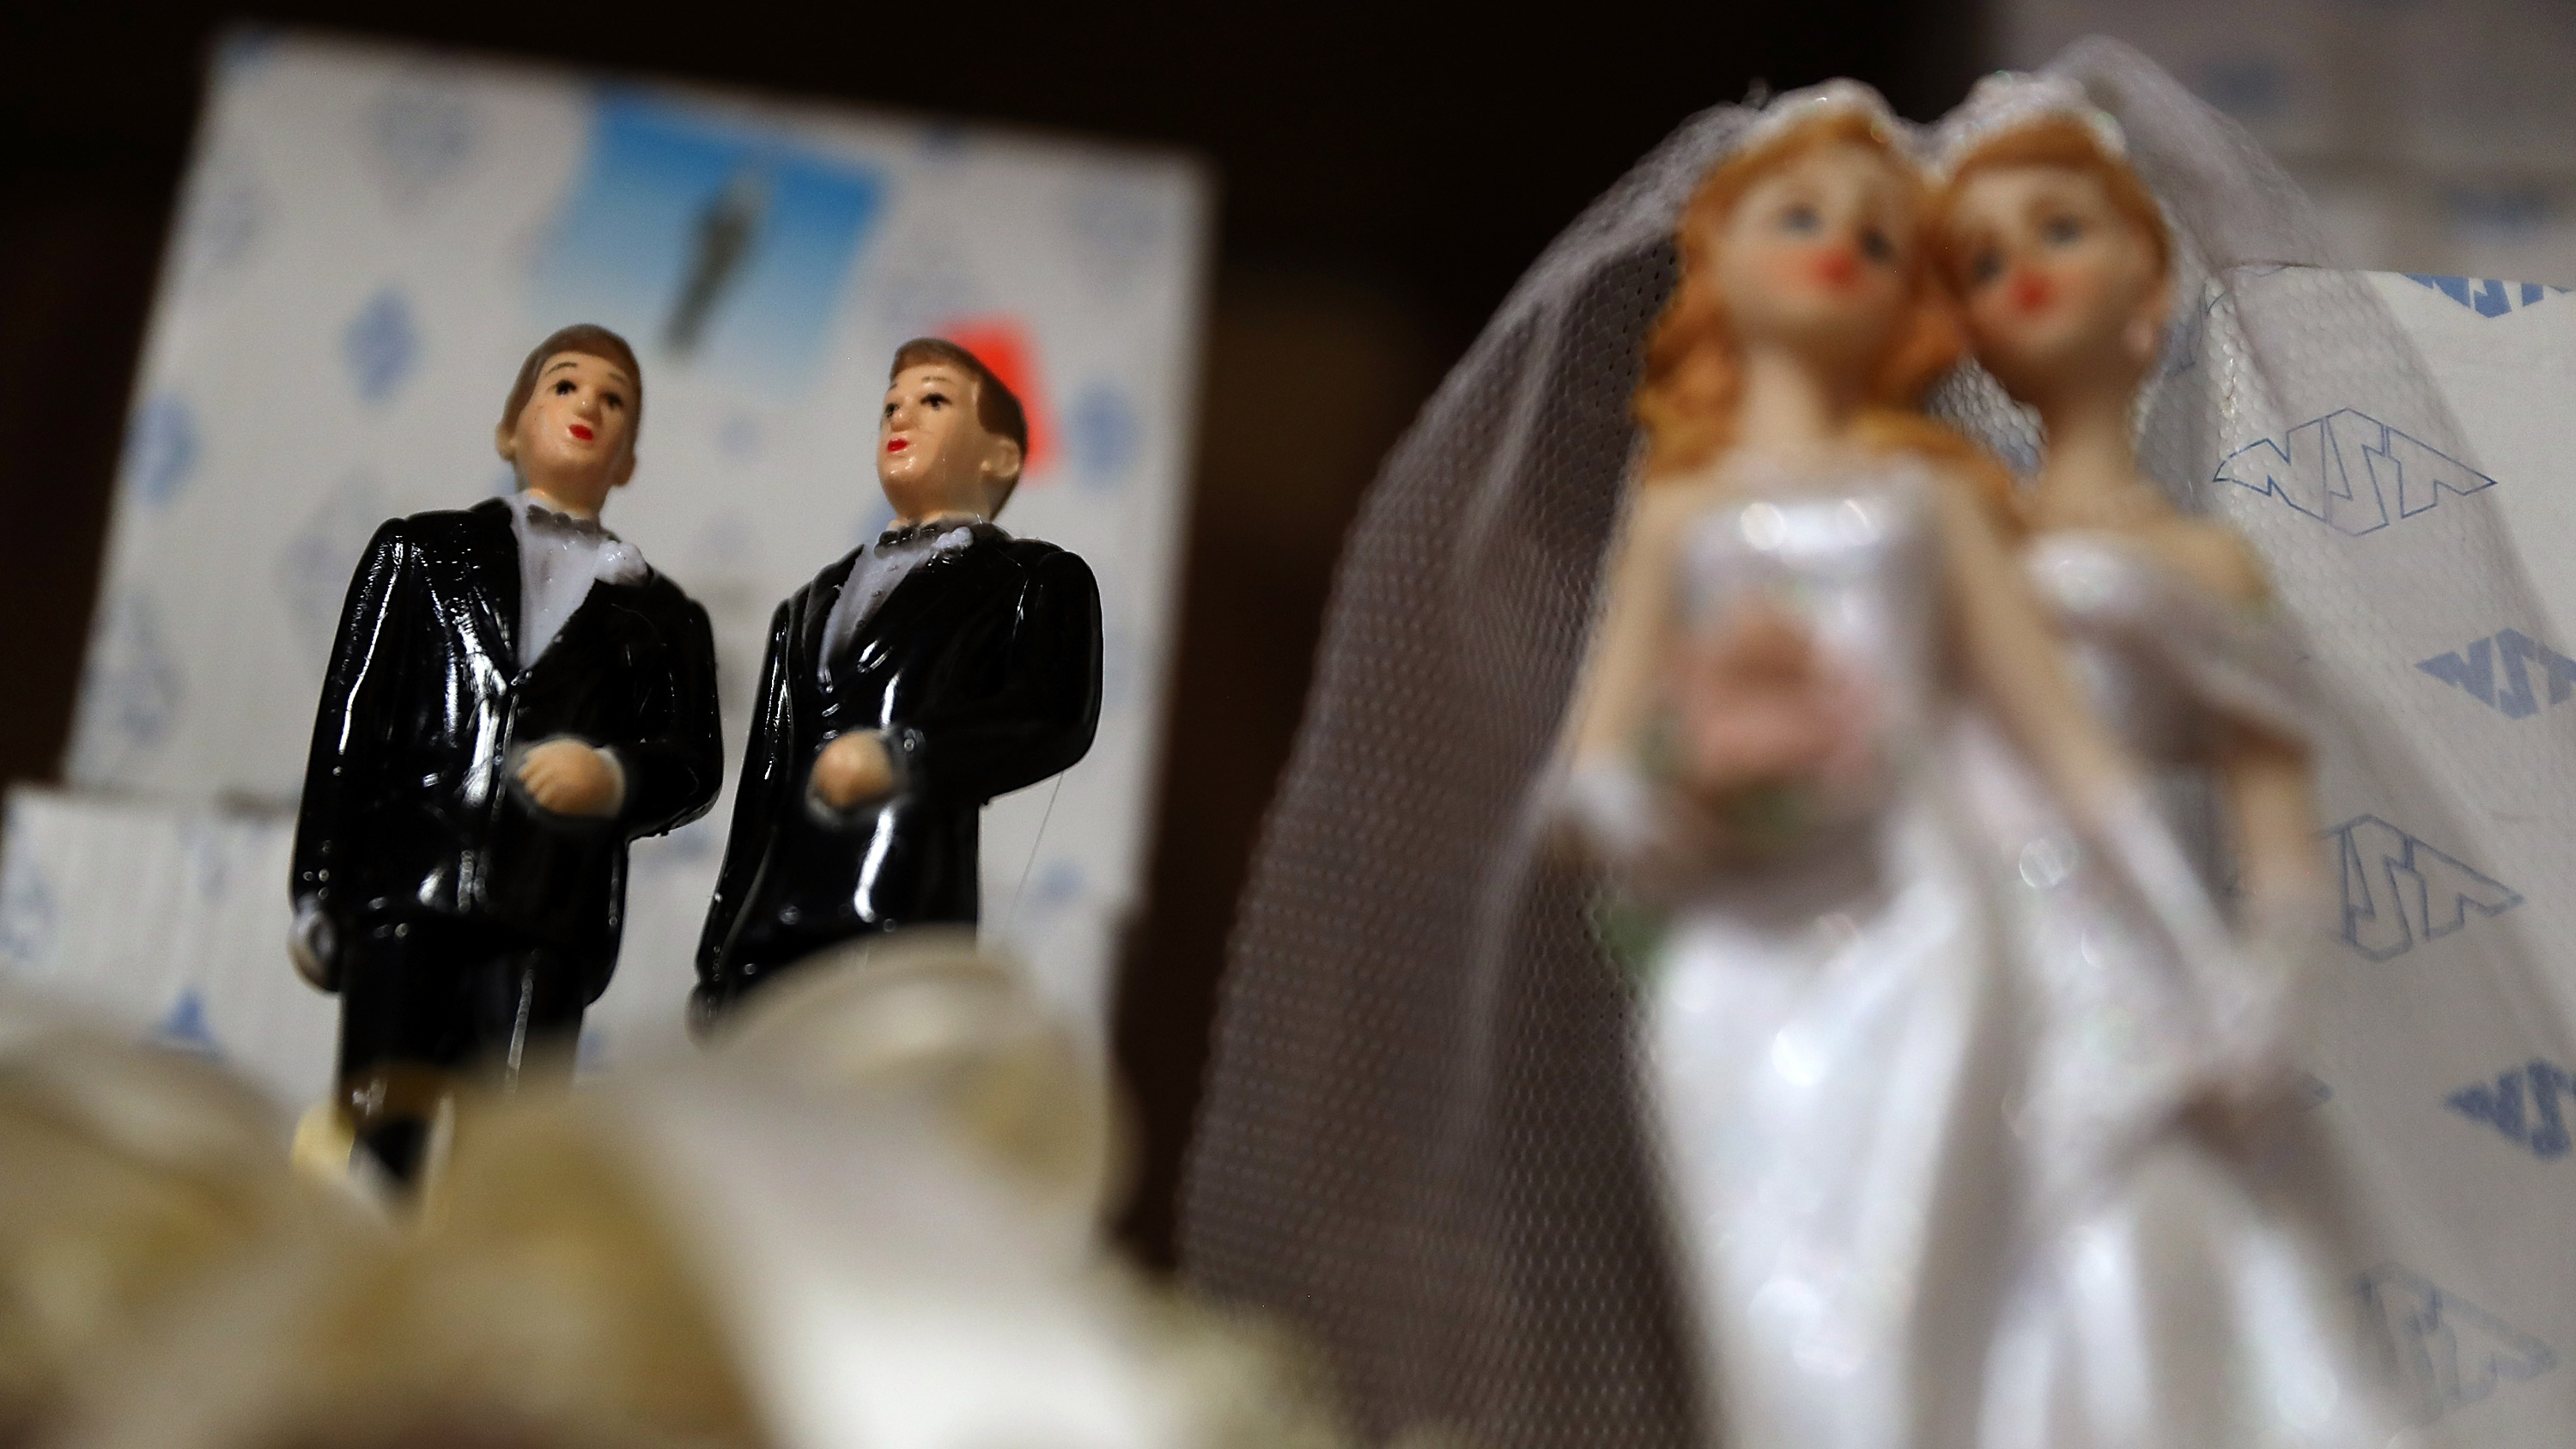 Same-sex marriage cake toppers are displayed on a shelf at Fantastico on December 5, 2017, in San Francisco, California.